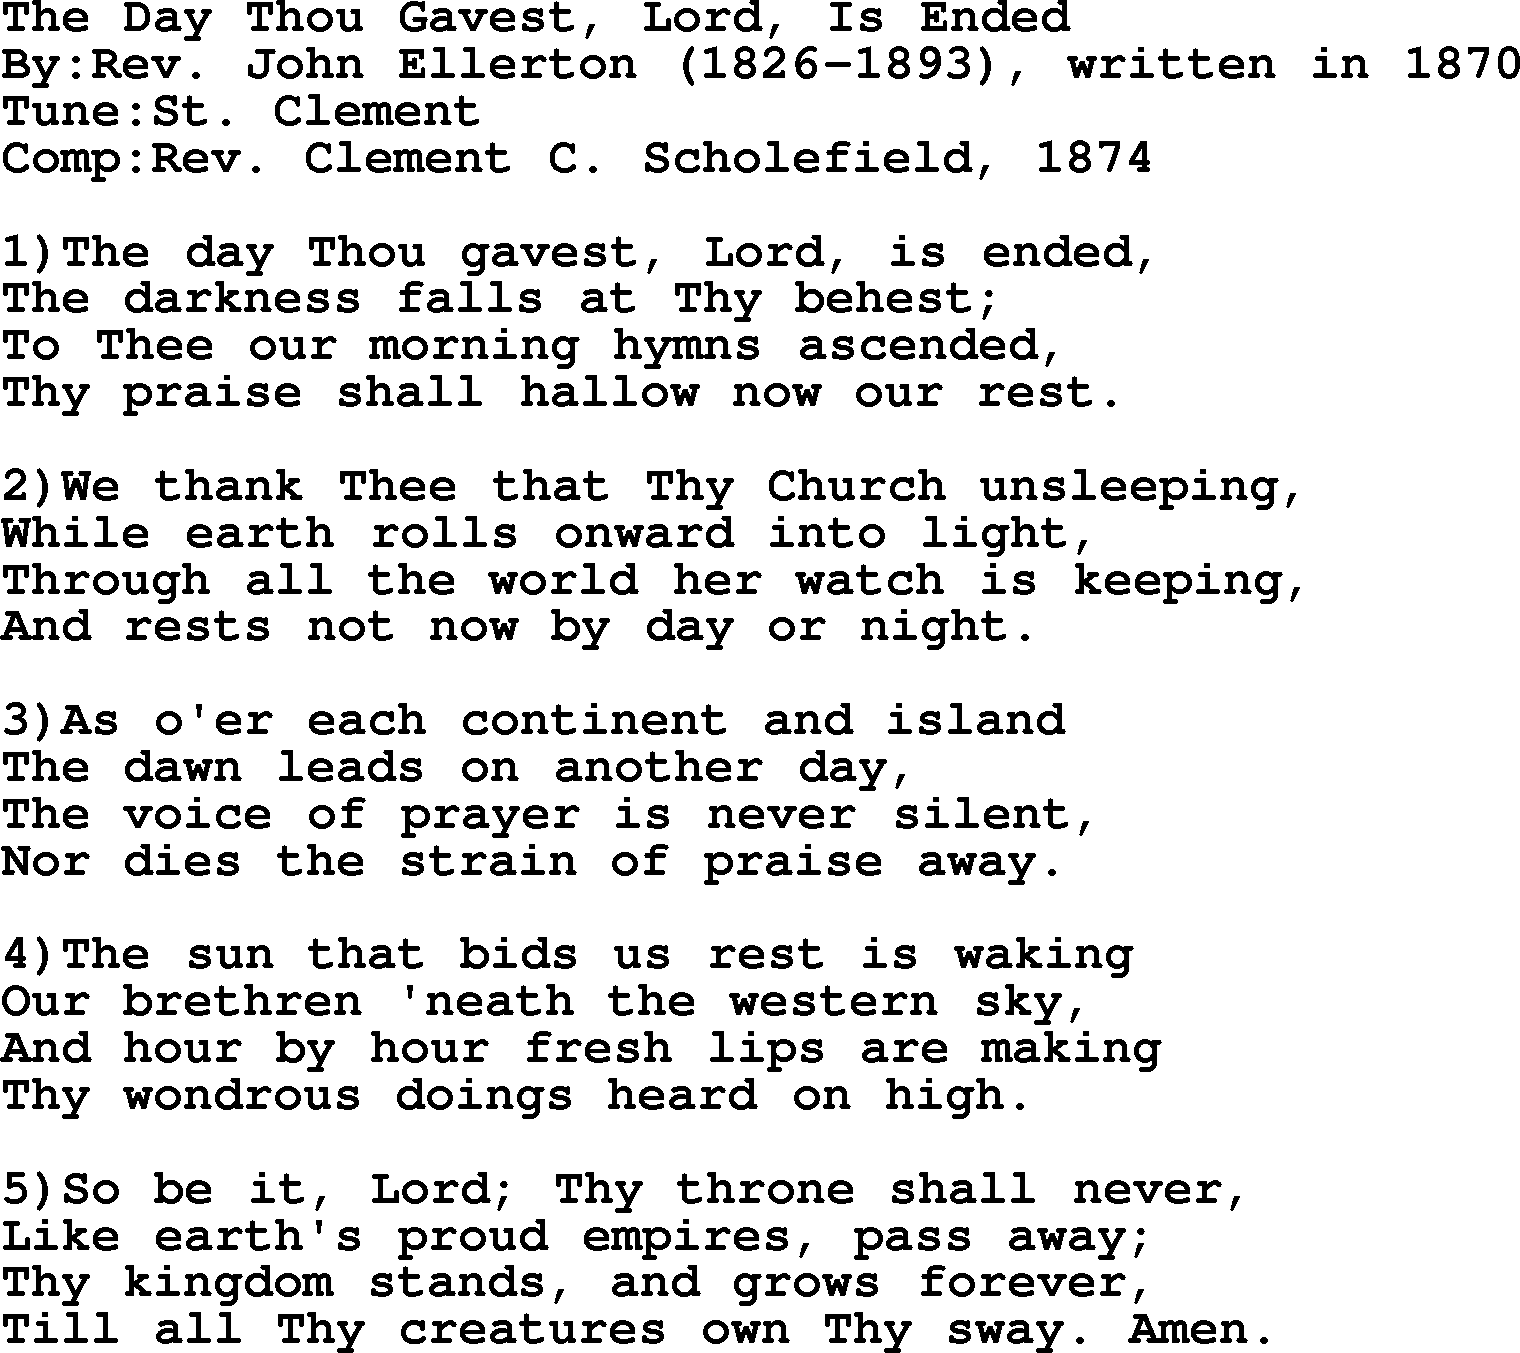 Methodist Hymn: The Day Thou Gavest, Lord, Is Ended, lyrics